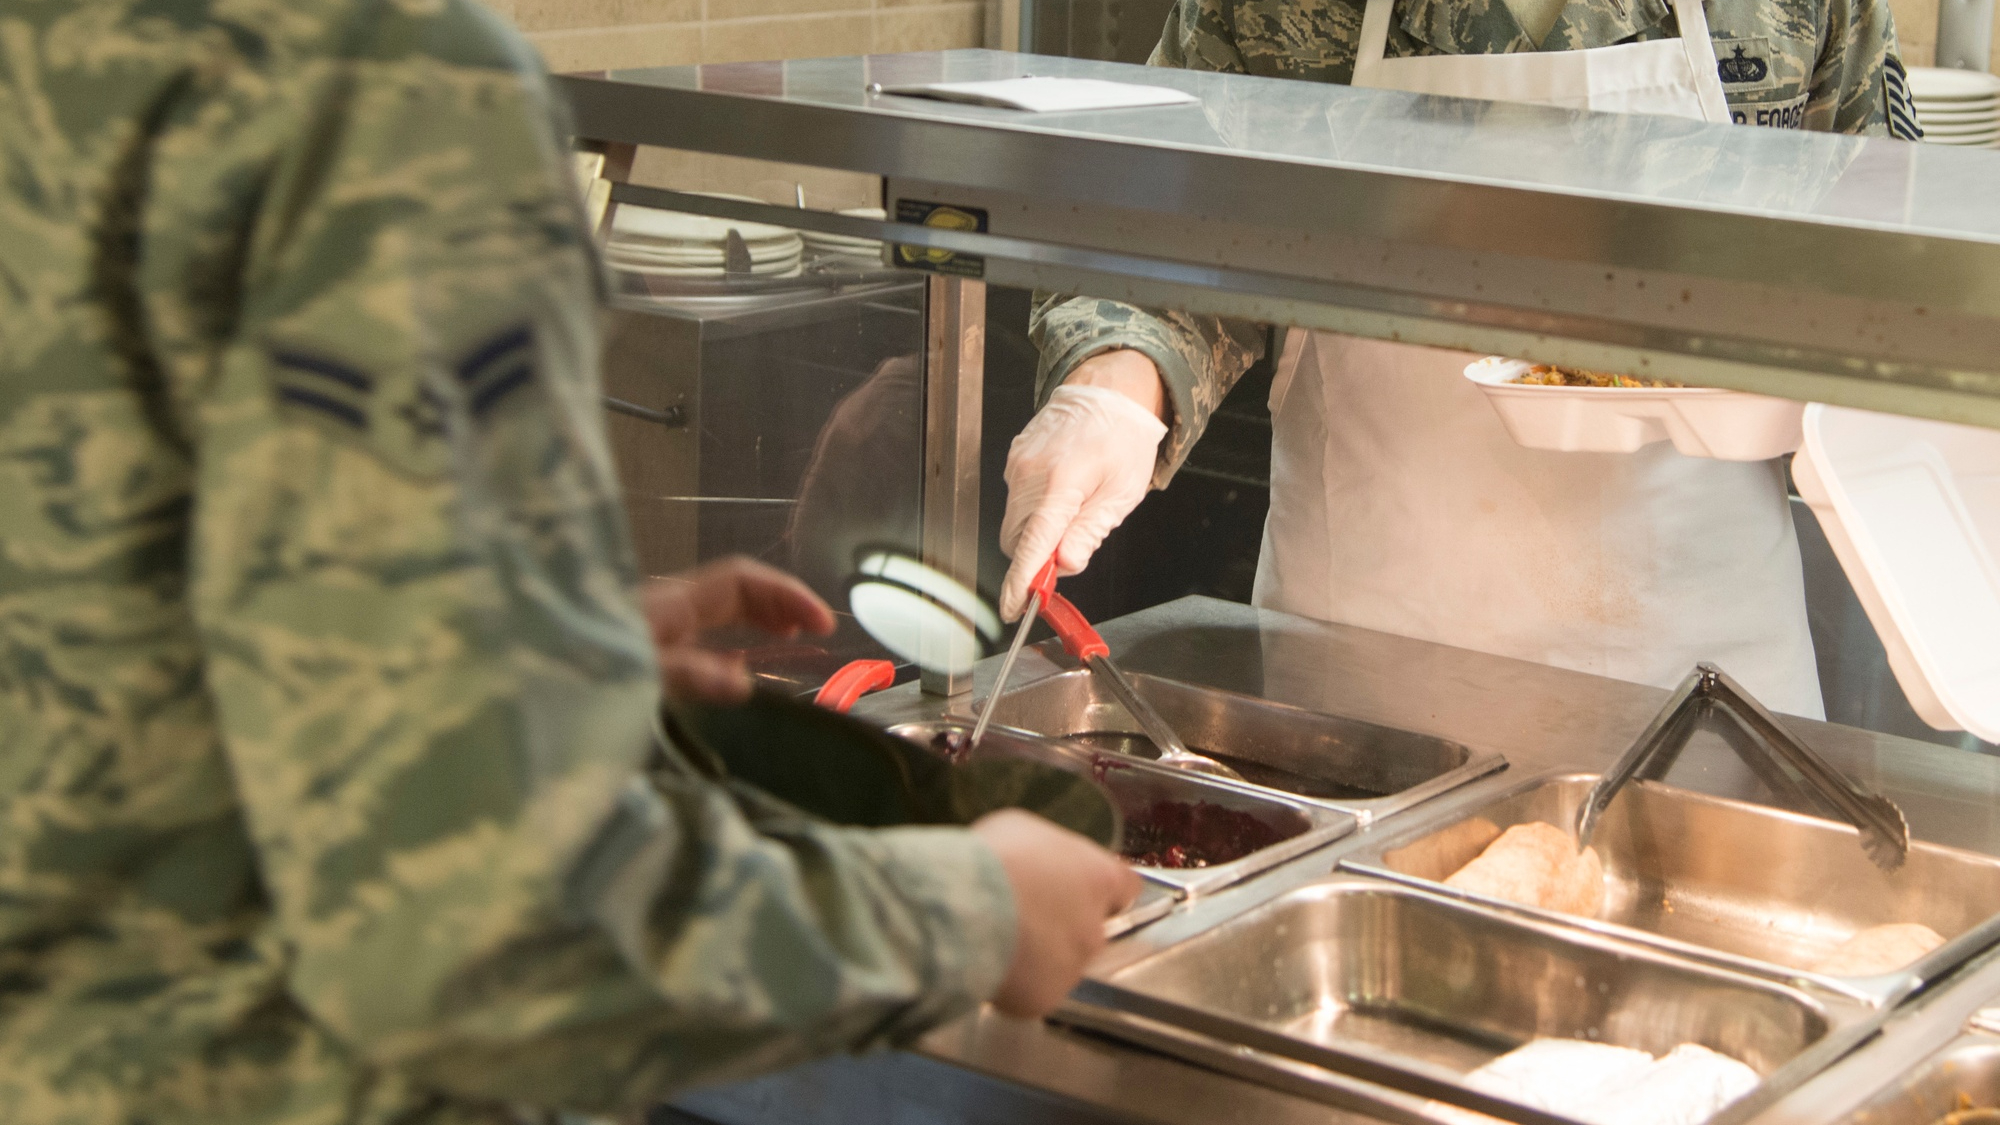 PETERSON AIR FORCE BASE, Colo. –Tech. Sgt. Oscar Santiago, 21st Force Support Squadron dining facility manager, serves a customer at the Aragon DFAC on Peterson Air Force Base, Colorado, Sept. 14, 2018. The food service specialists at the Aragon DFAC and surrounding bases underwent extensive culinary training Sept. 11-14, as part of the Department of Defense’s Go for Green initiative. (U.S. Air Force photo by Staff Sgt. Emily Kenney)